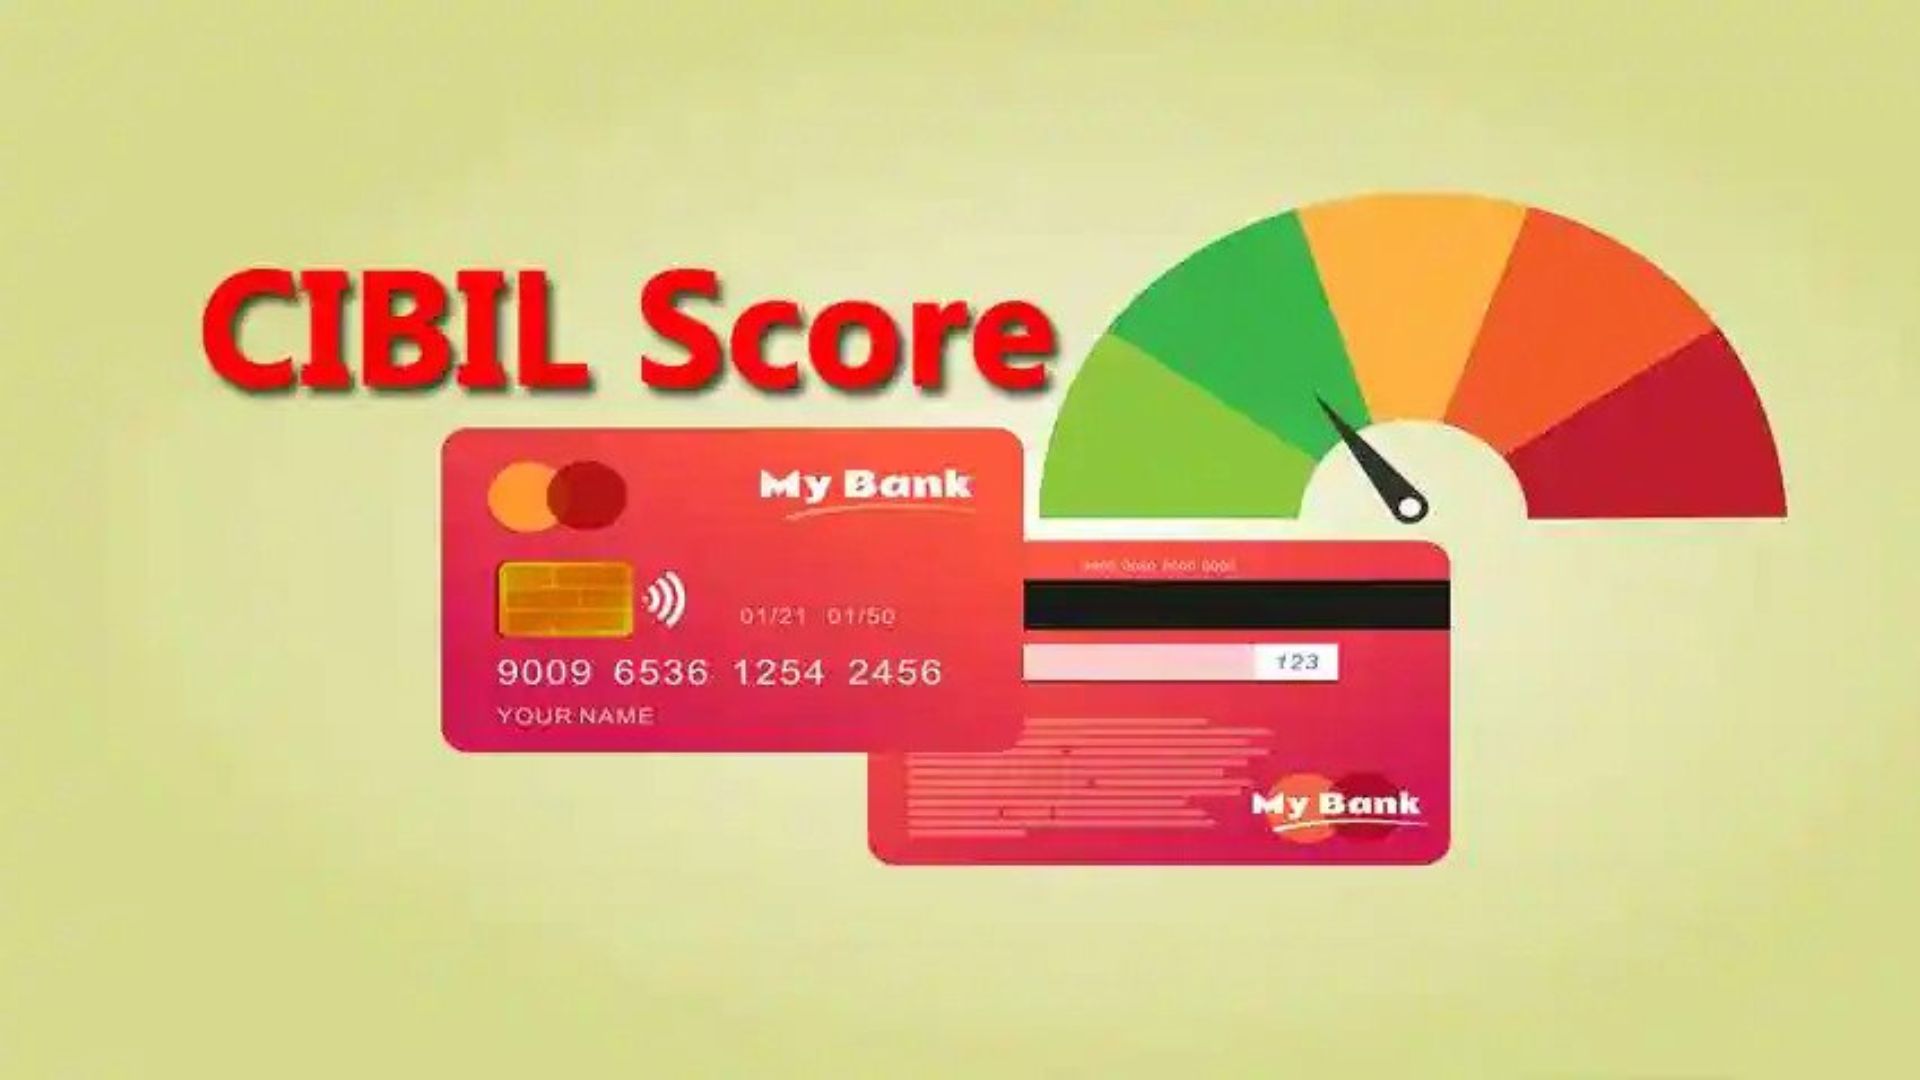 Credit Scores Decoded: The Significance of Your Credit Score in Loan and Card Applications